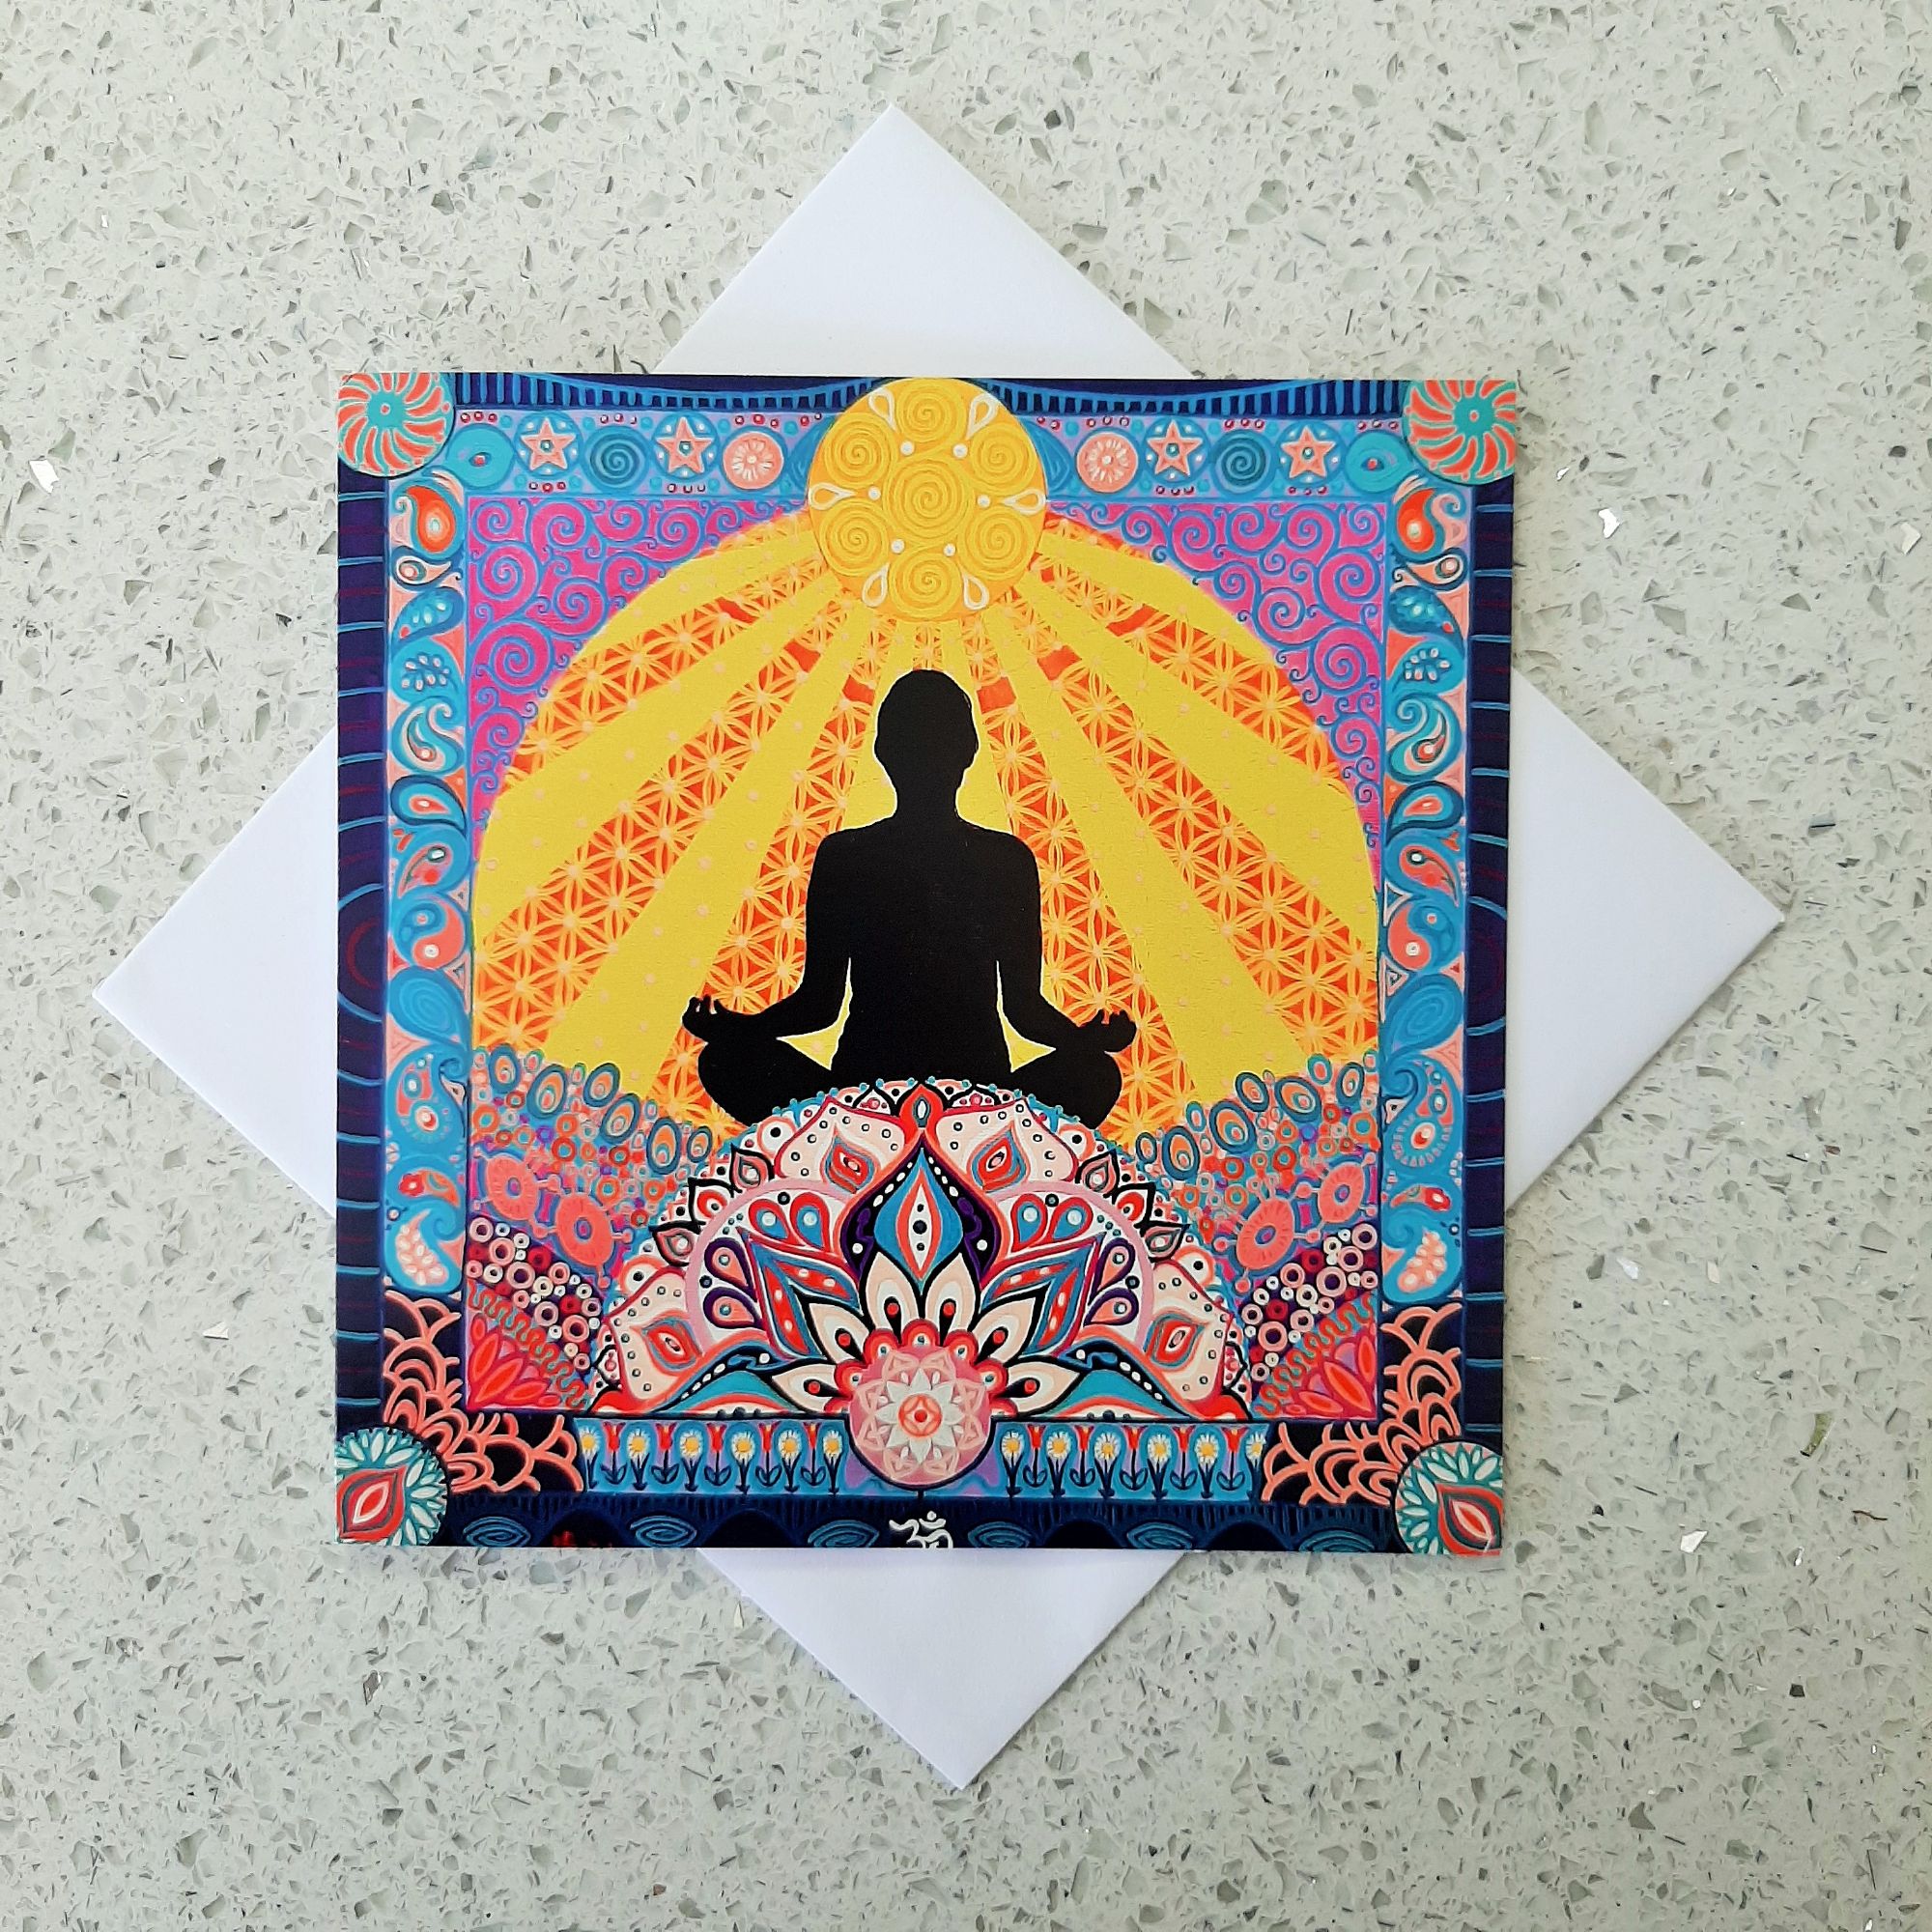 Greetings card featuring a meditating person sat beneath a sun and it's rays, amongst a mindful  landscape